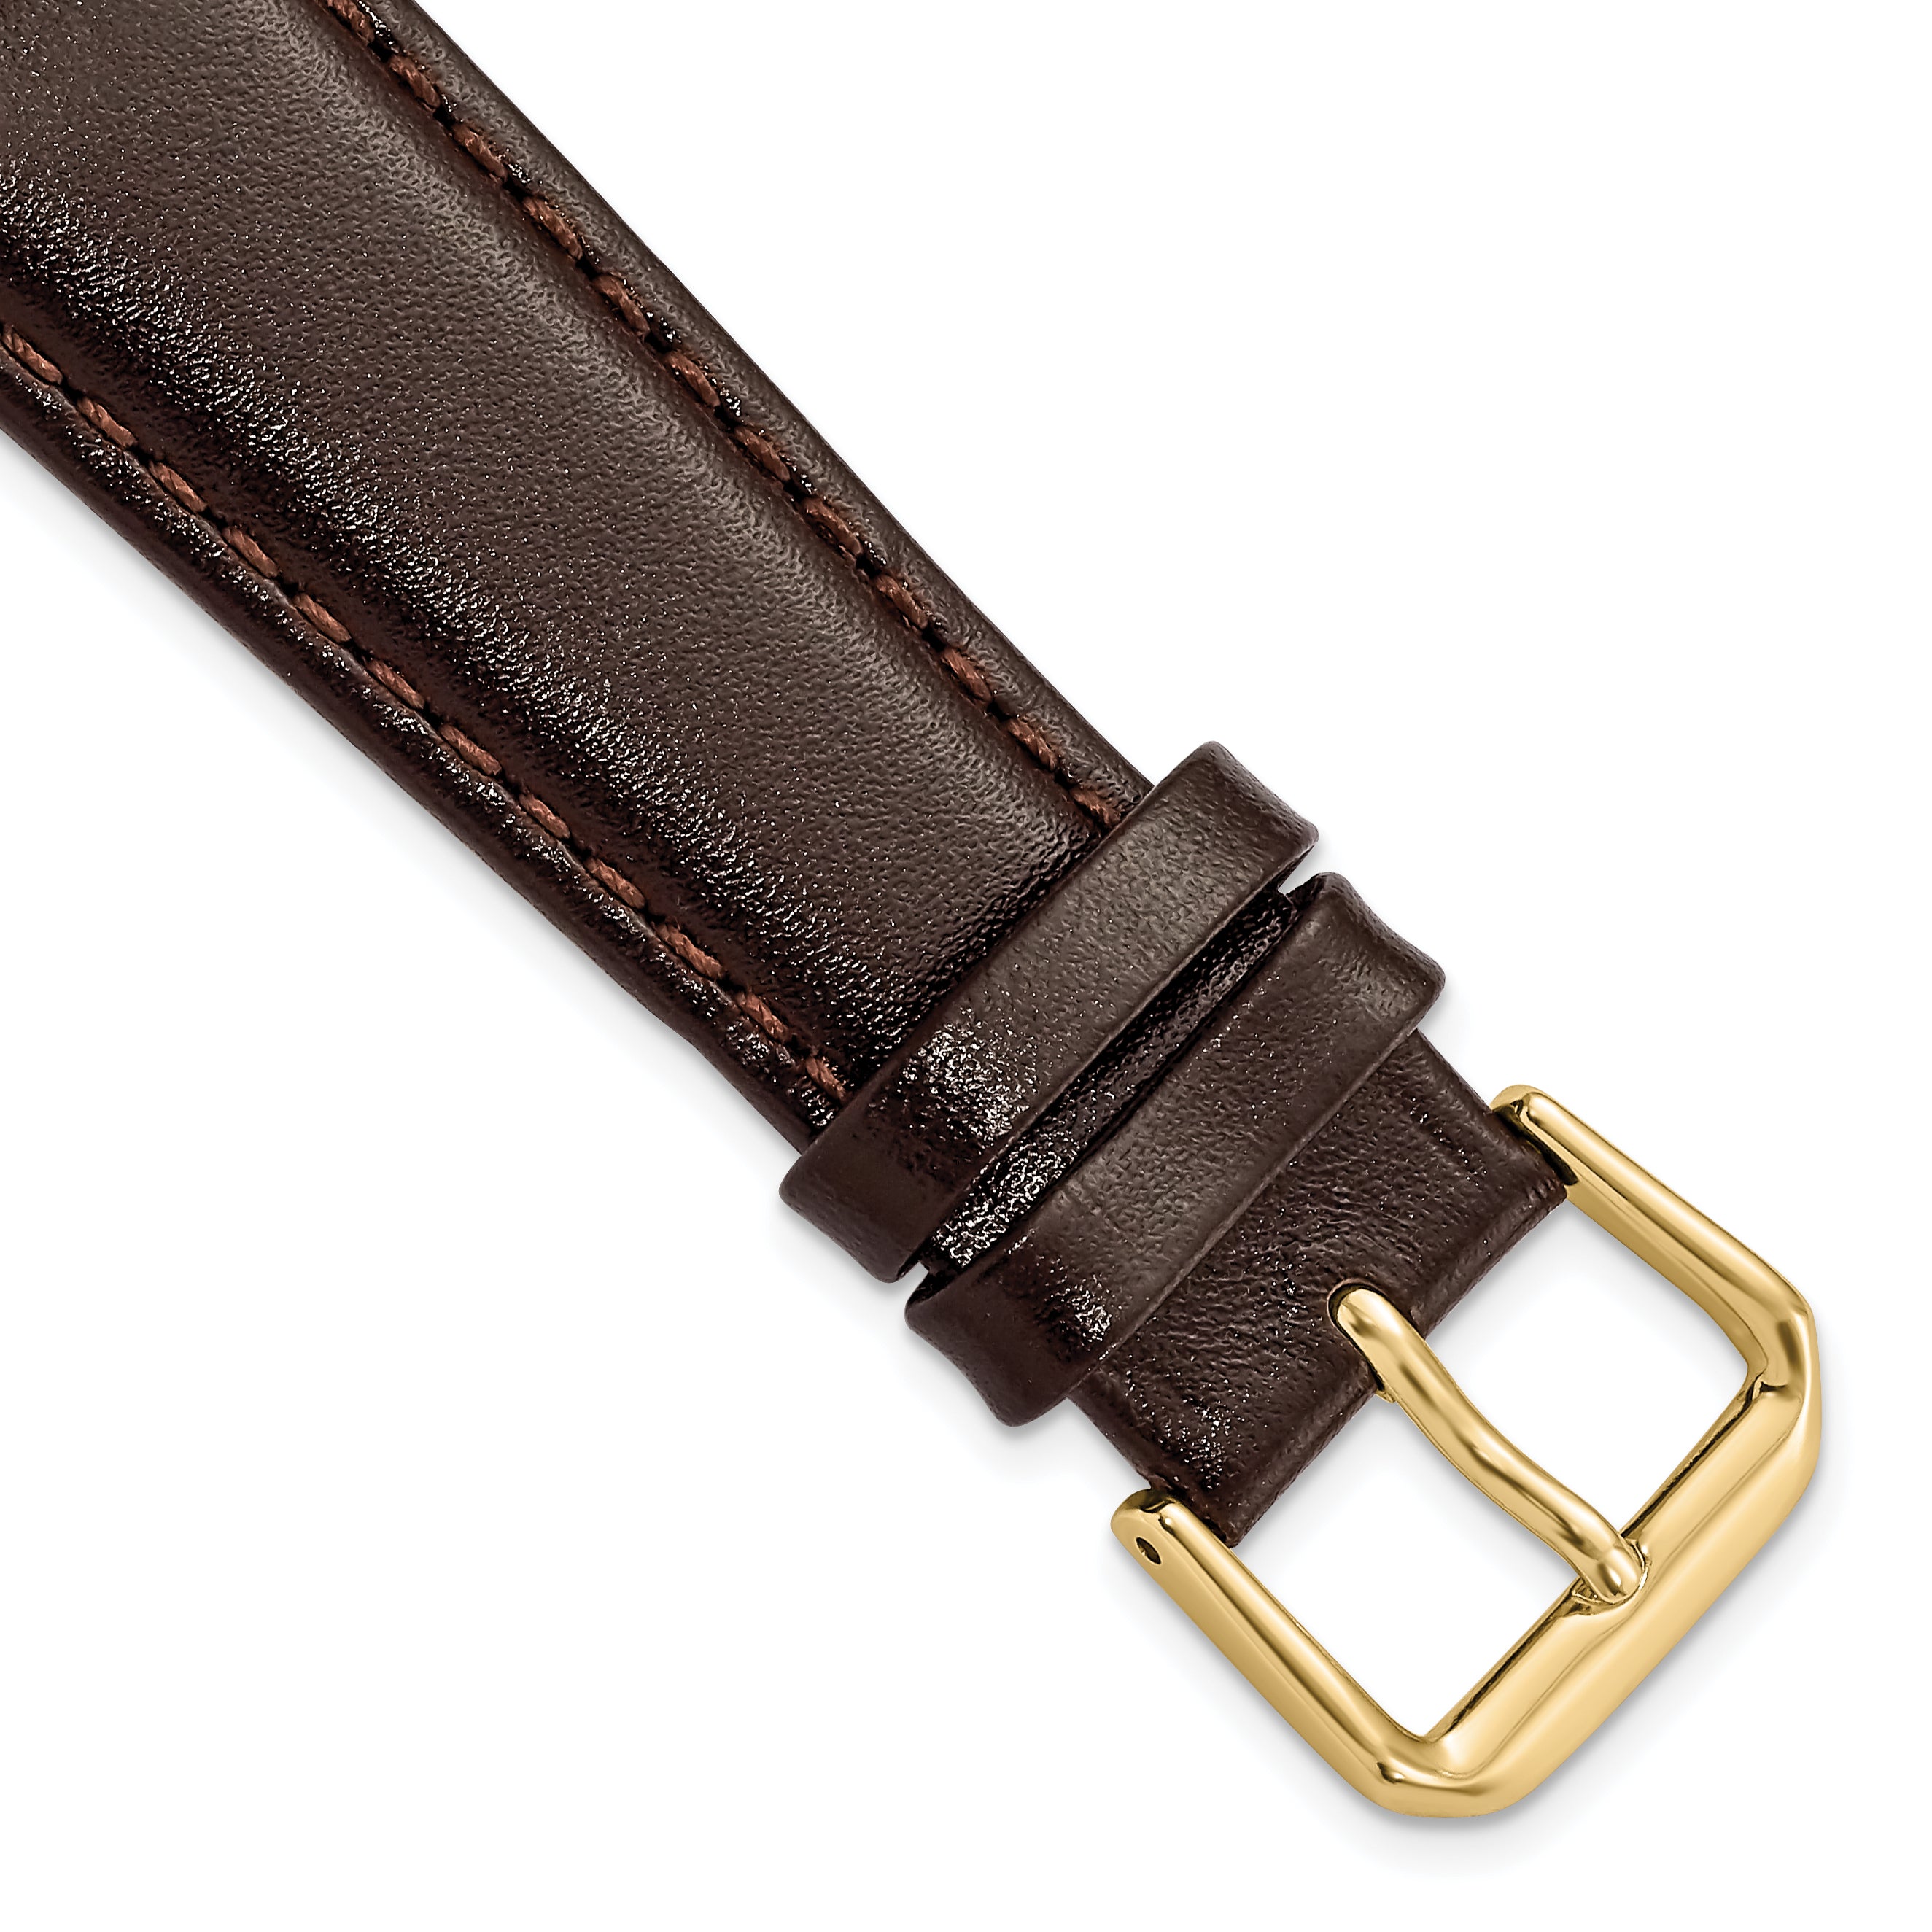 DeBeer 20mm Short Dark Brown Smooth Leather with Gold-tone Buckle 6.75 inch Watch Band